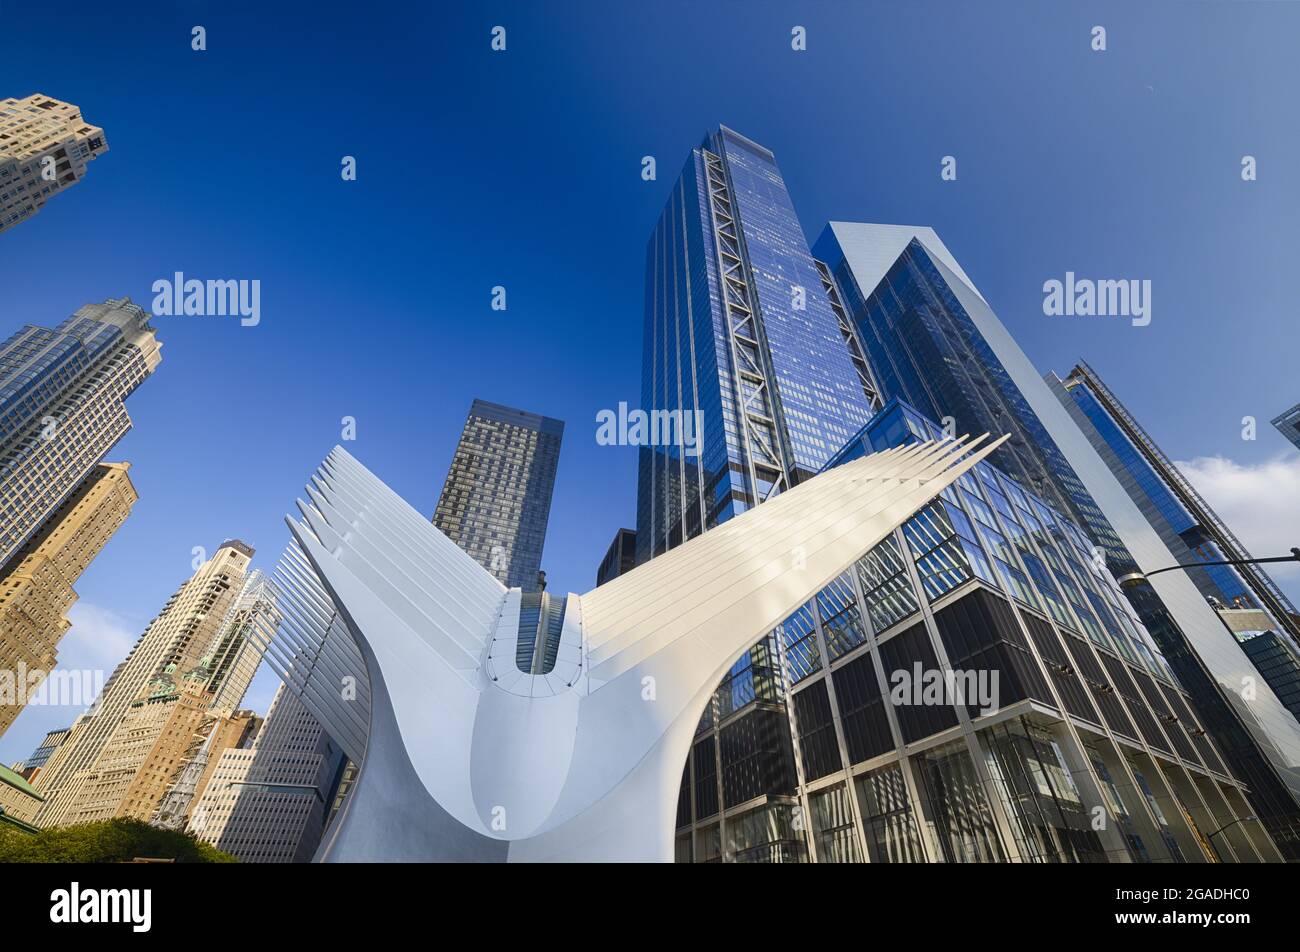 Low Angle View of the Oculus World Trade Center, Man hattan, New York City, USA Stock Photo